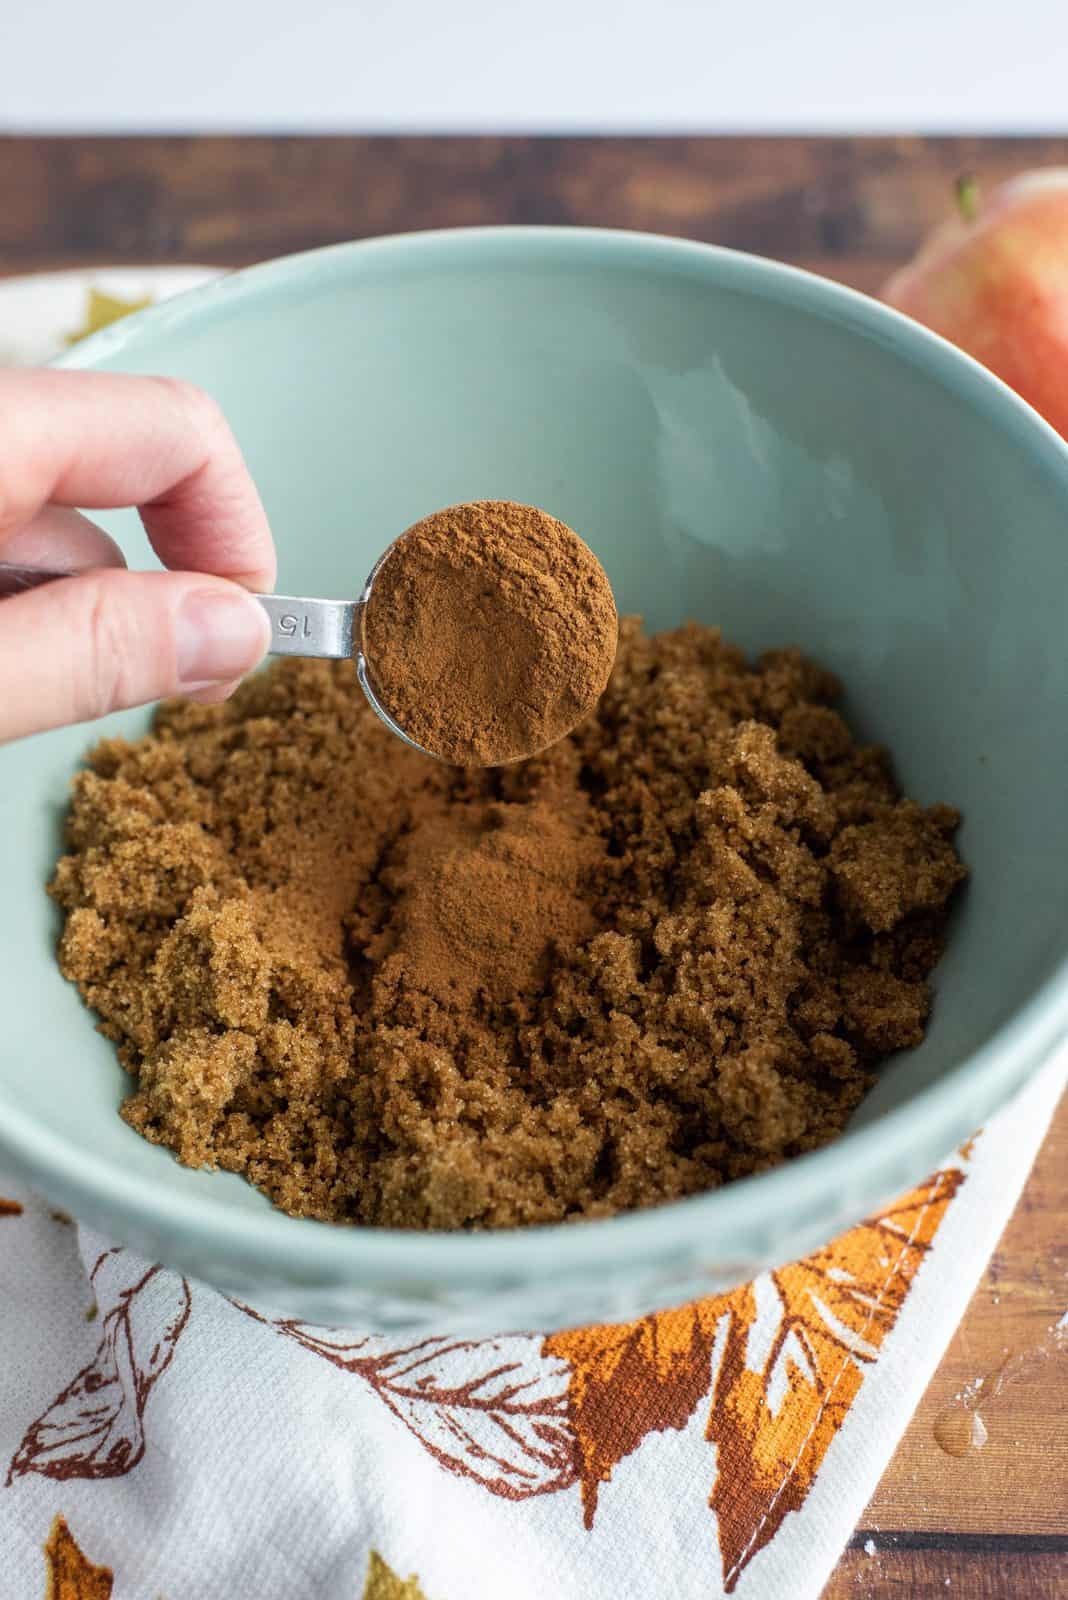 Cinnamon, brown sugar and nutmeg being mixed together in bowl.